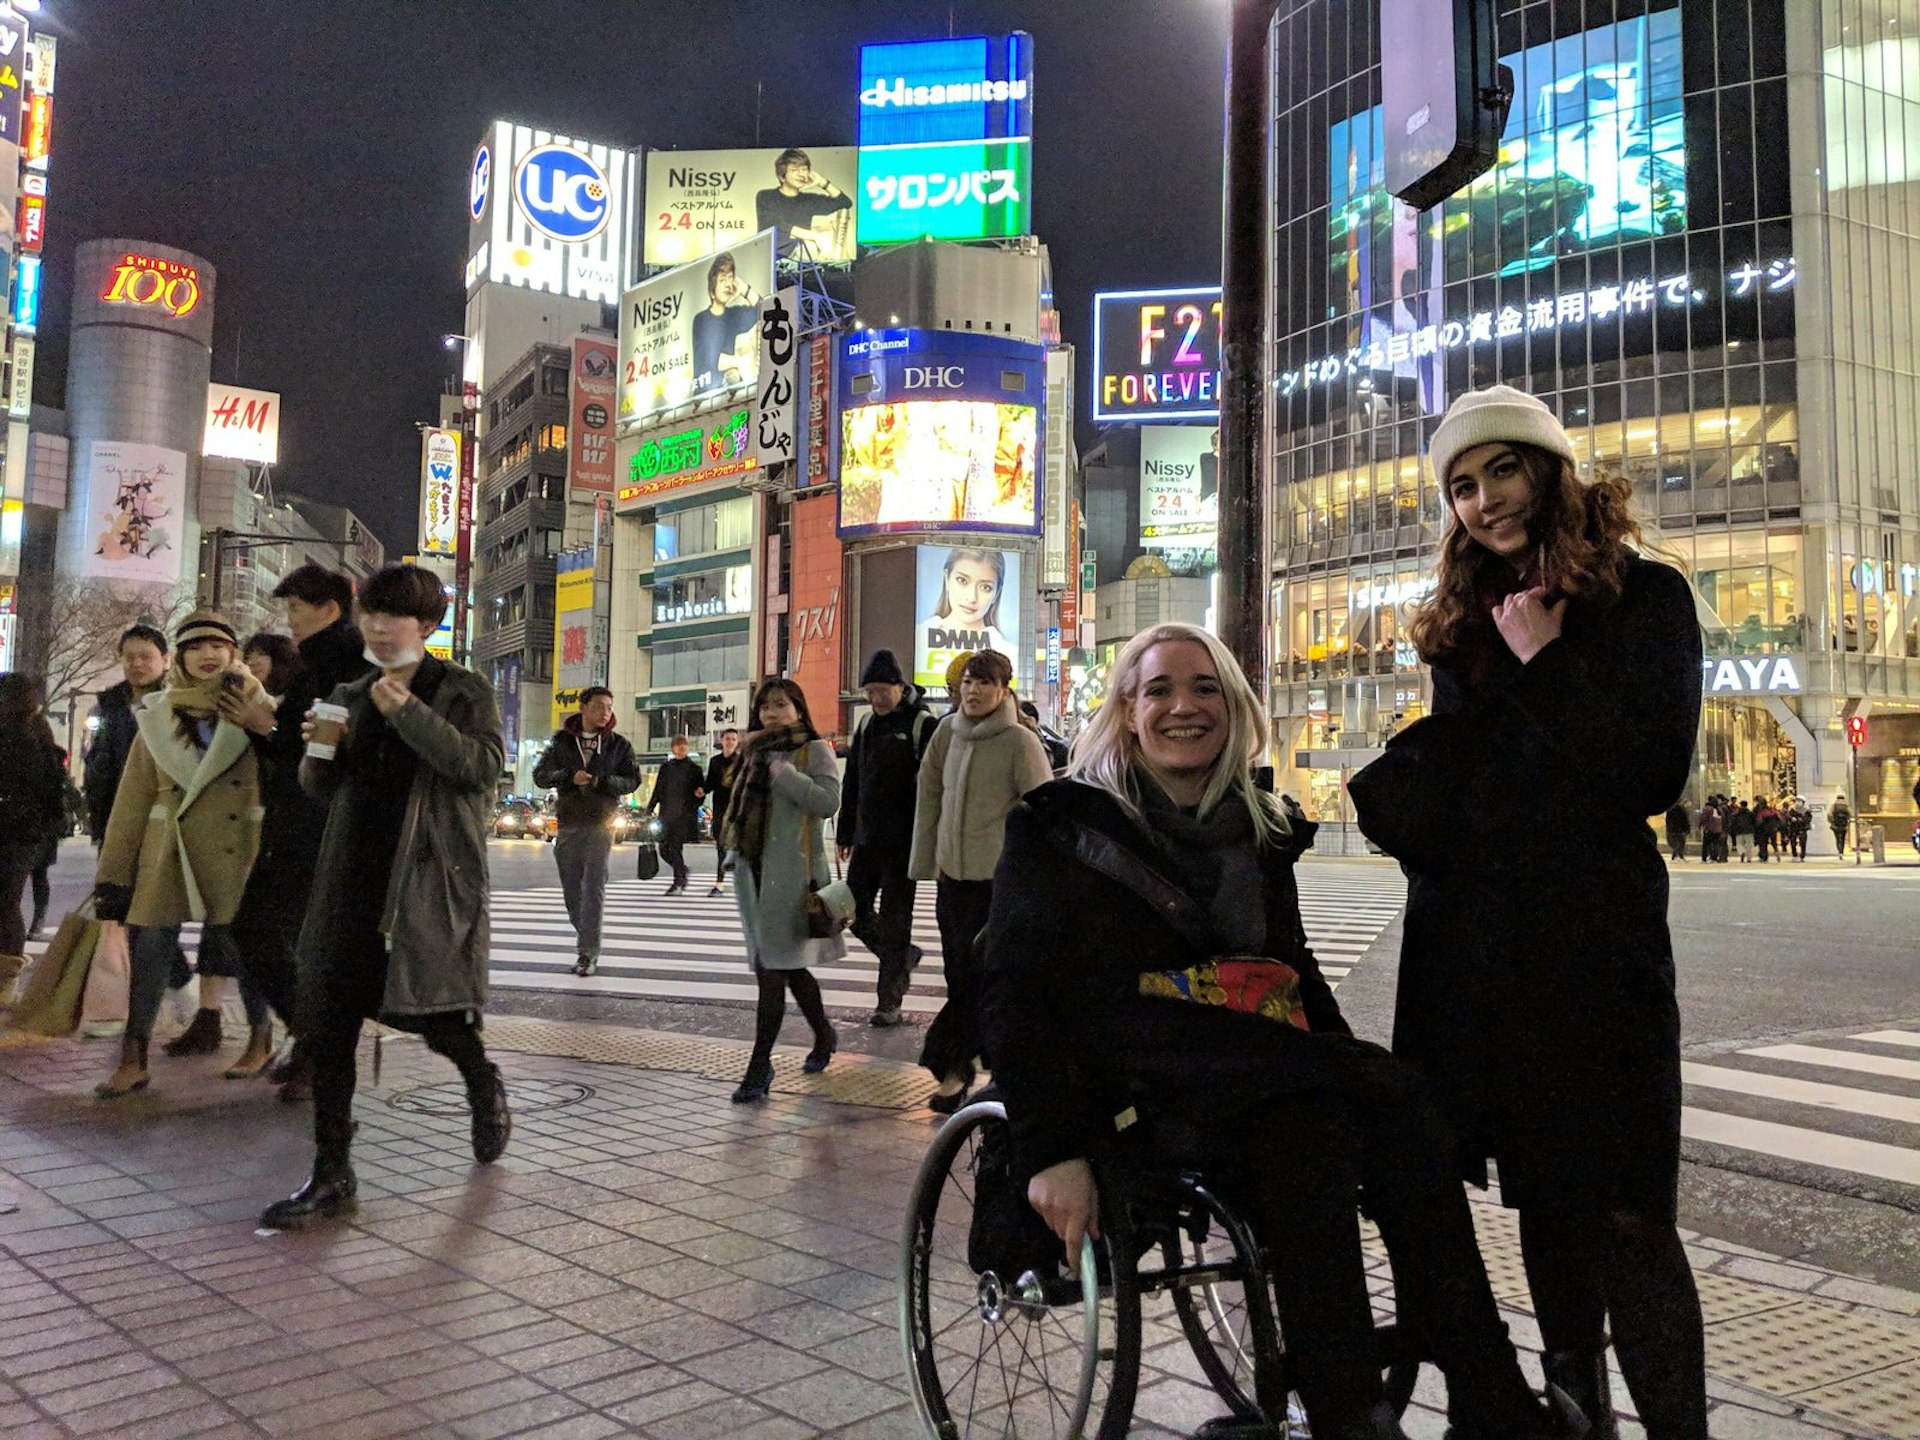 Writer Louise Bruton, a wheelchair user, and her friend posing for a photo at Tokyo's Shibuya Crossing; Japanese people are crossing behind them, with the modern buildings and bright lights of Shibuya in the background.